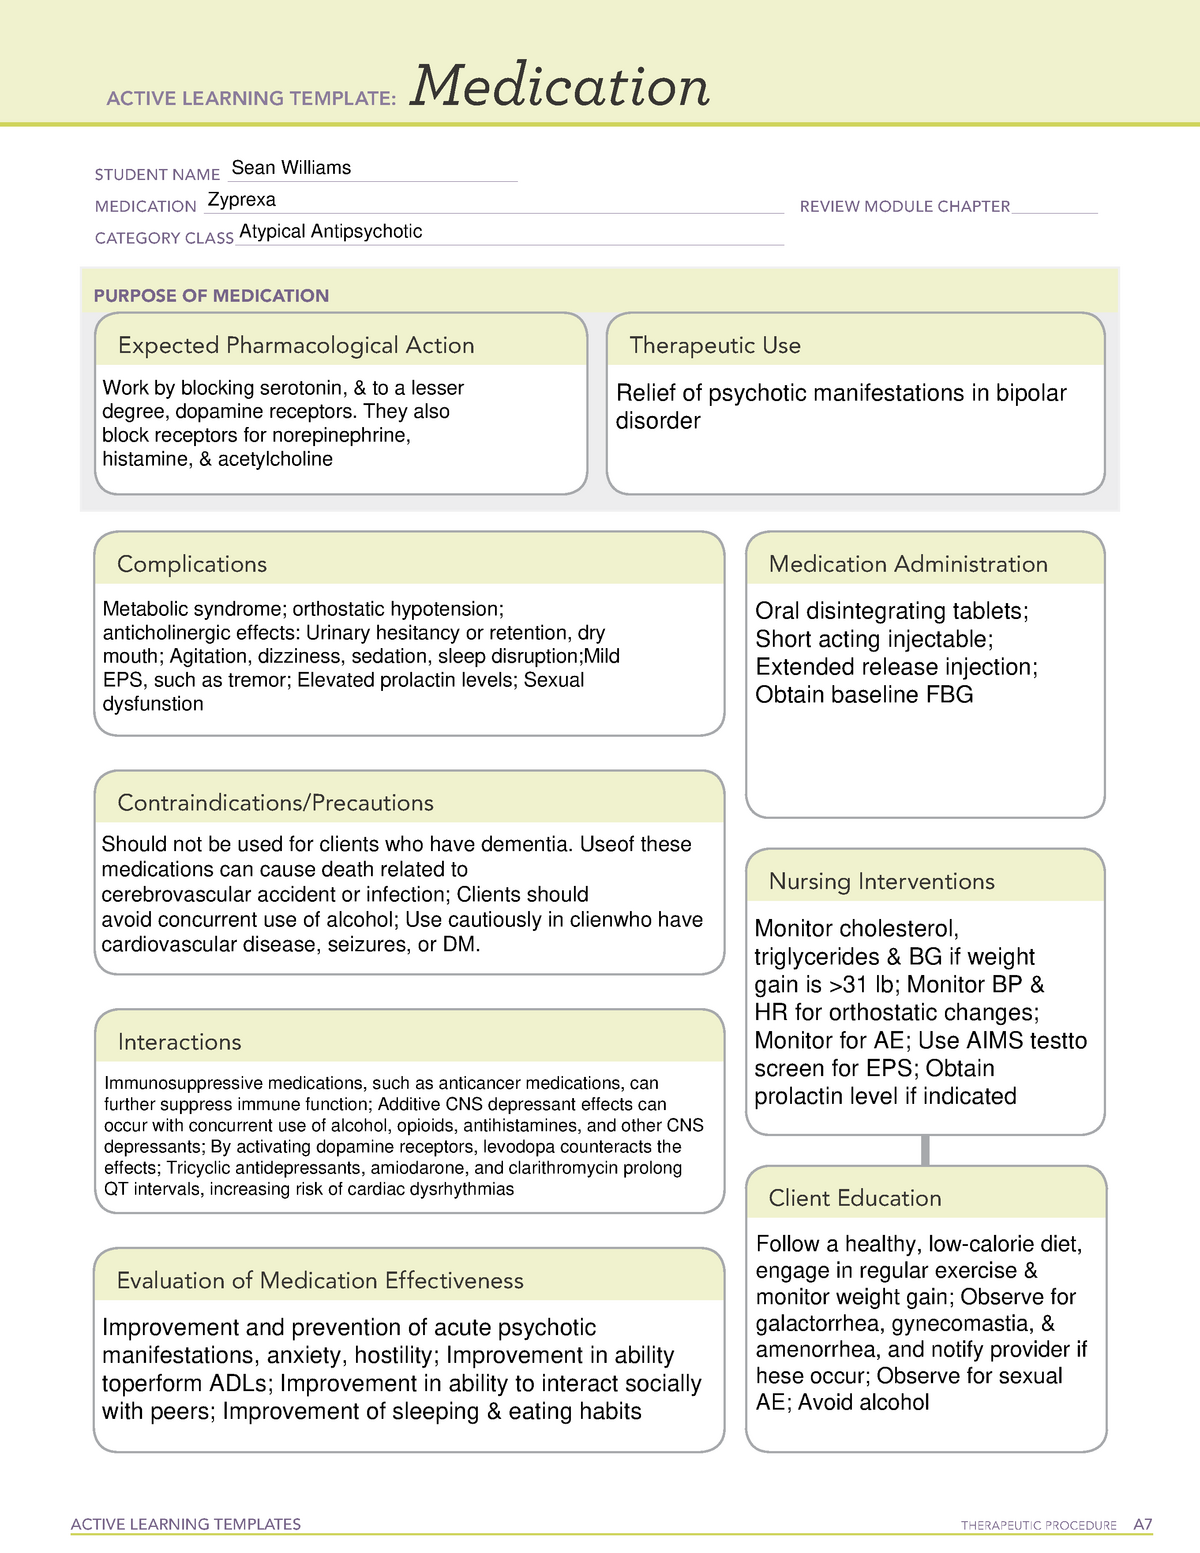 ati-medication-template-zyprexa-active-learning-templates-therapeutic